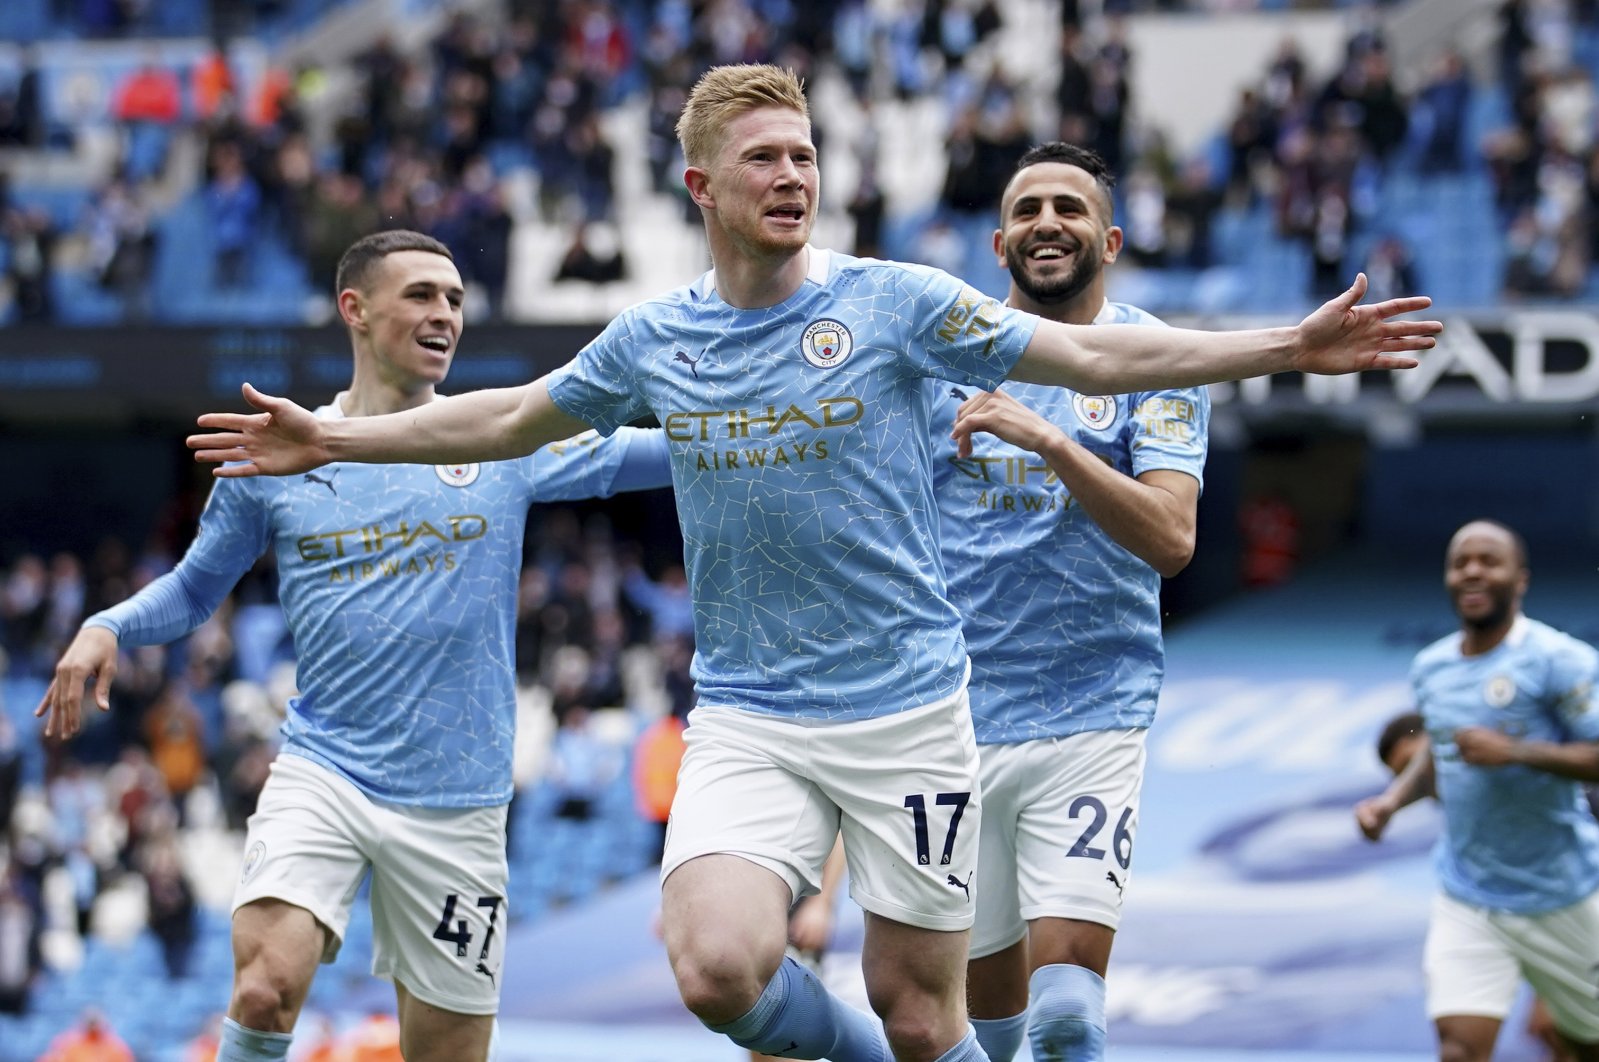 Manchester City's Kevin De Bruyne (C) Phil Foden (L) and Riyad Mahrez celebrate a goal against Everton in the Premier League, Manchester, England, May 23, 2021. (AP Photo)